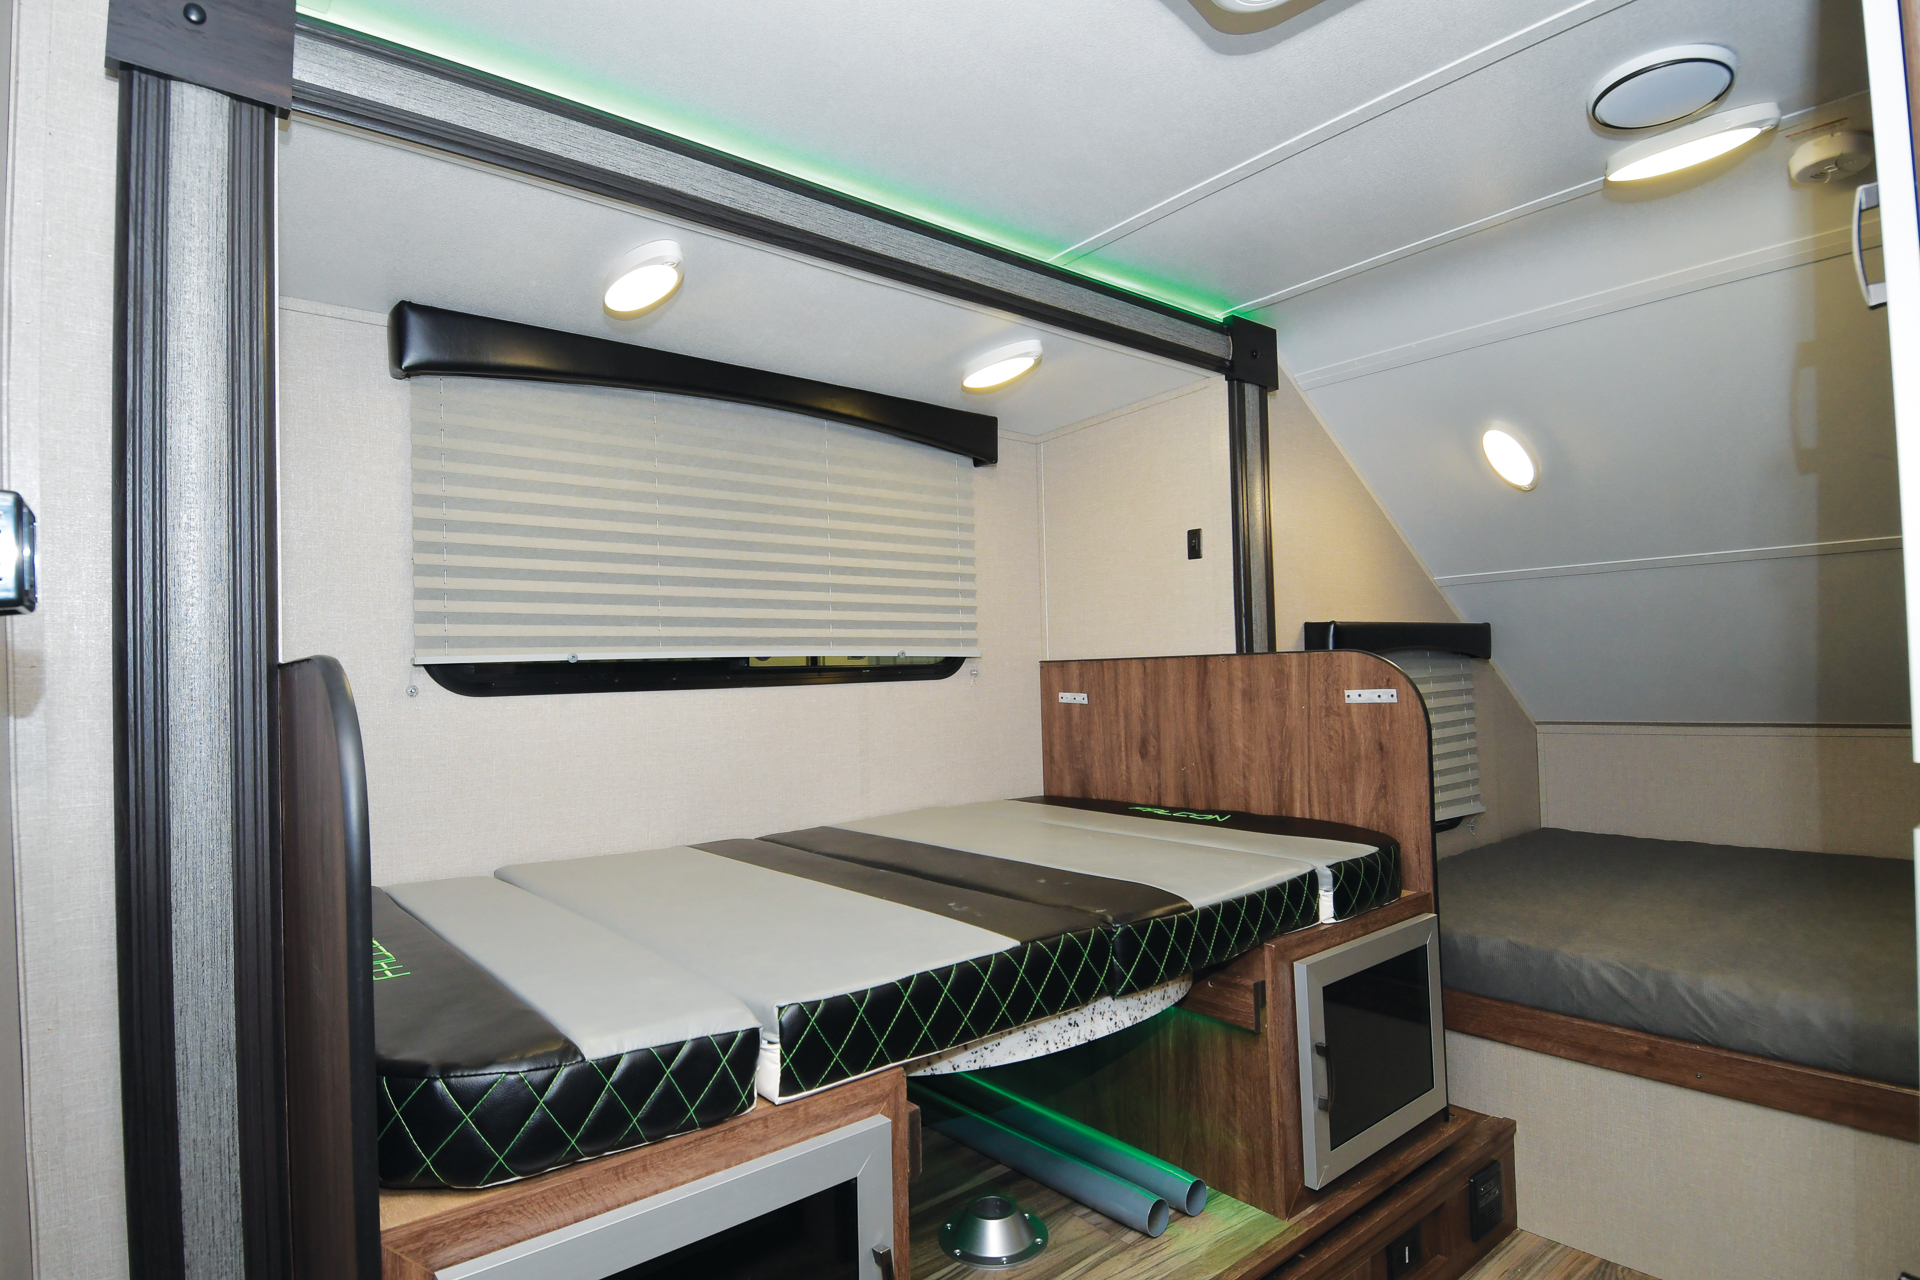 The Falcon GT dinette slide gives this trailer extra interior space. With the dinette seats up you can enjoy a meal, watch the 32" TV, and relax after a day on the road.